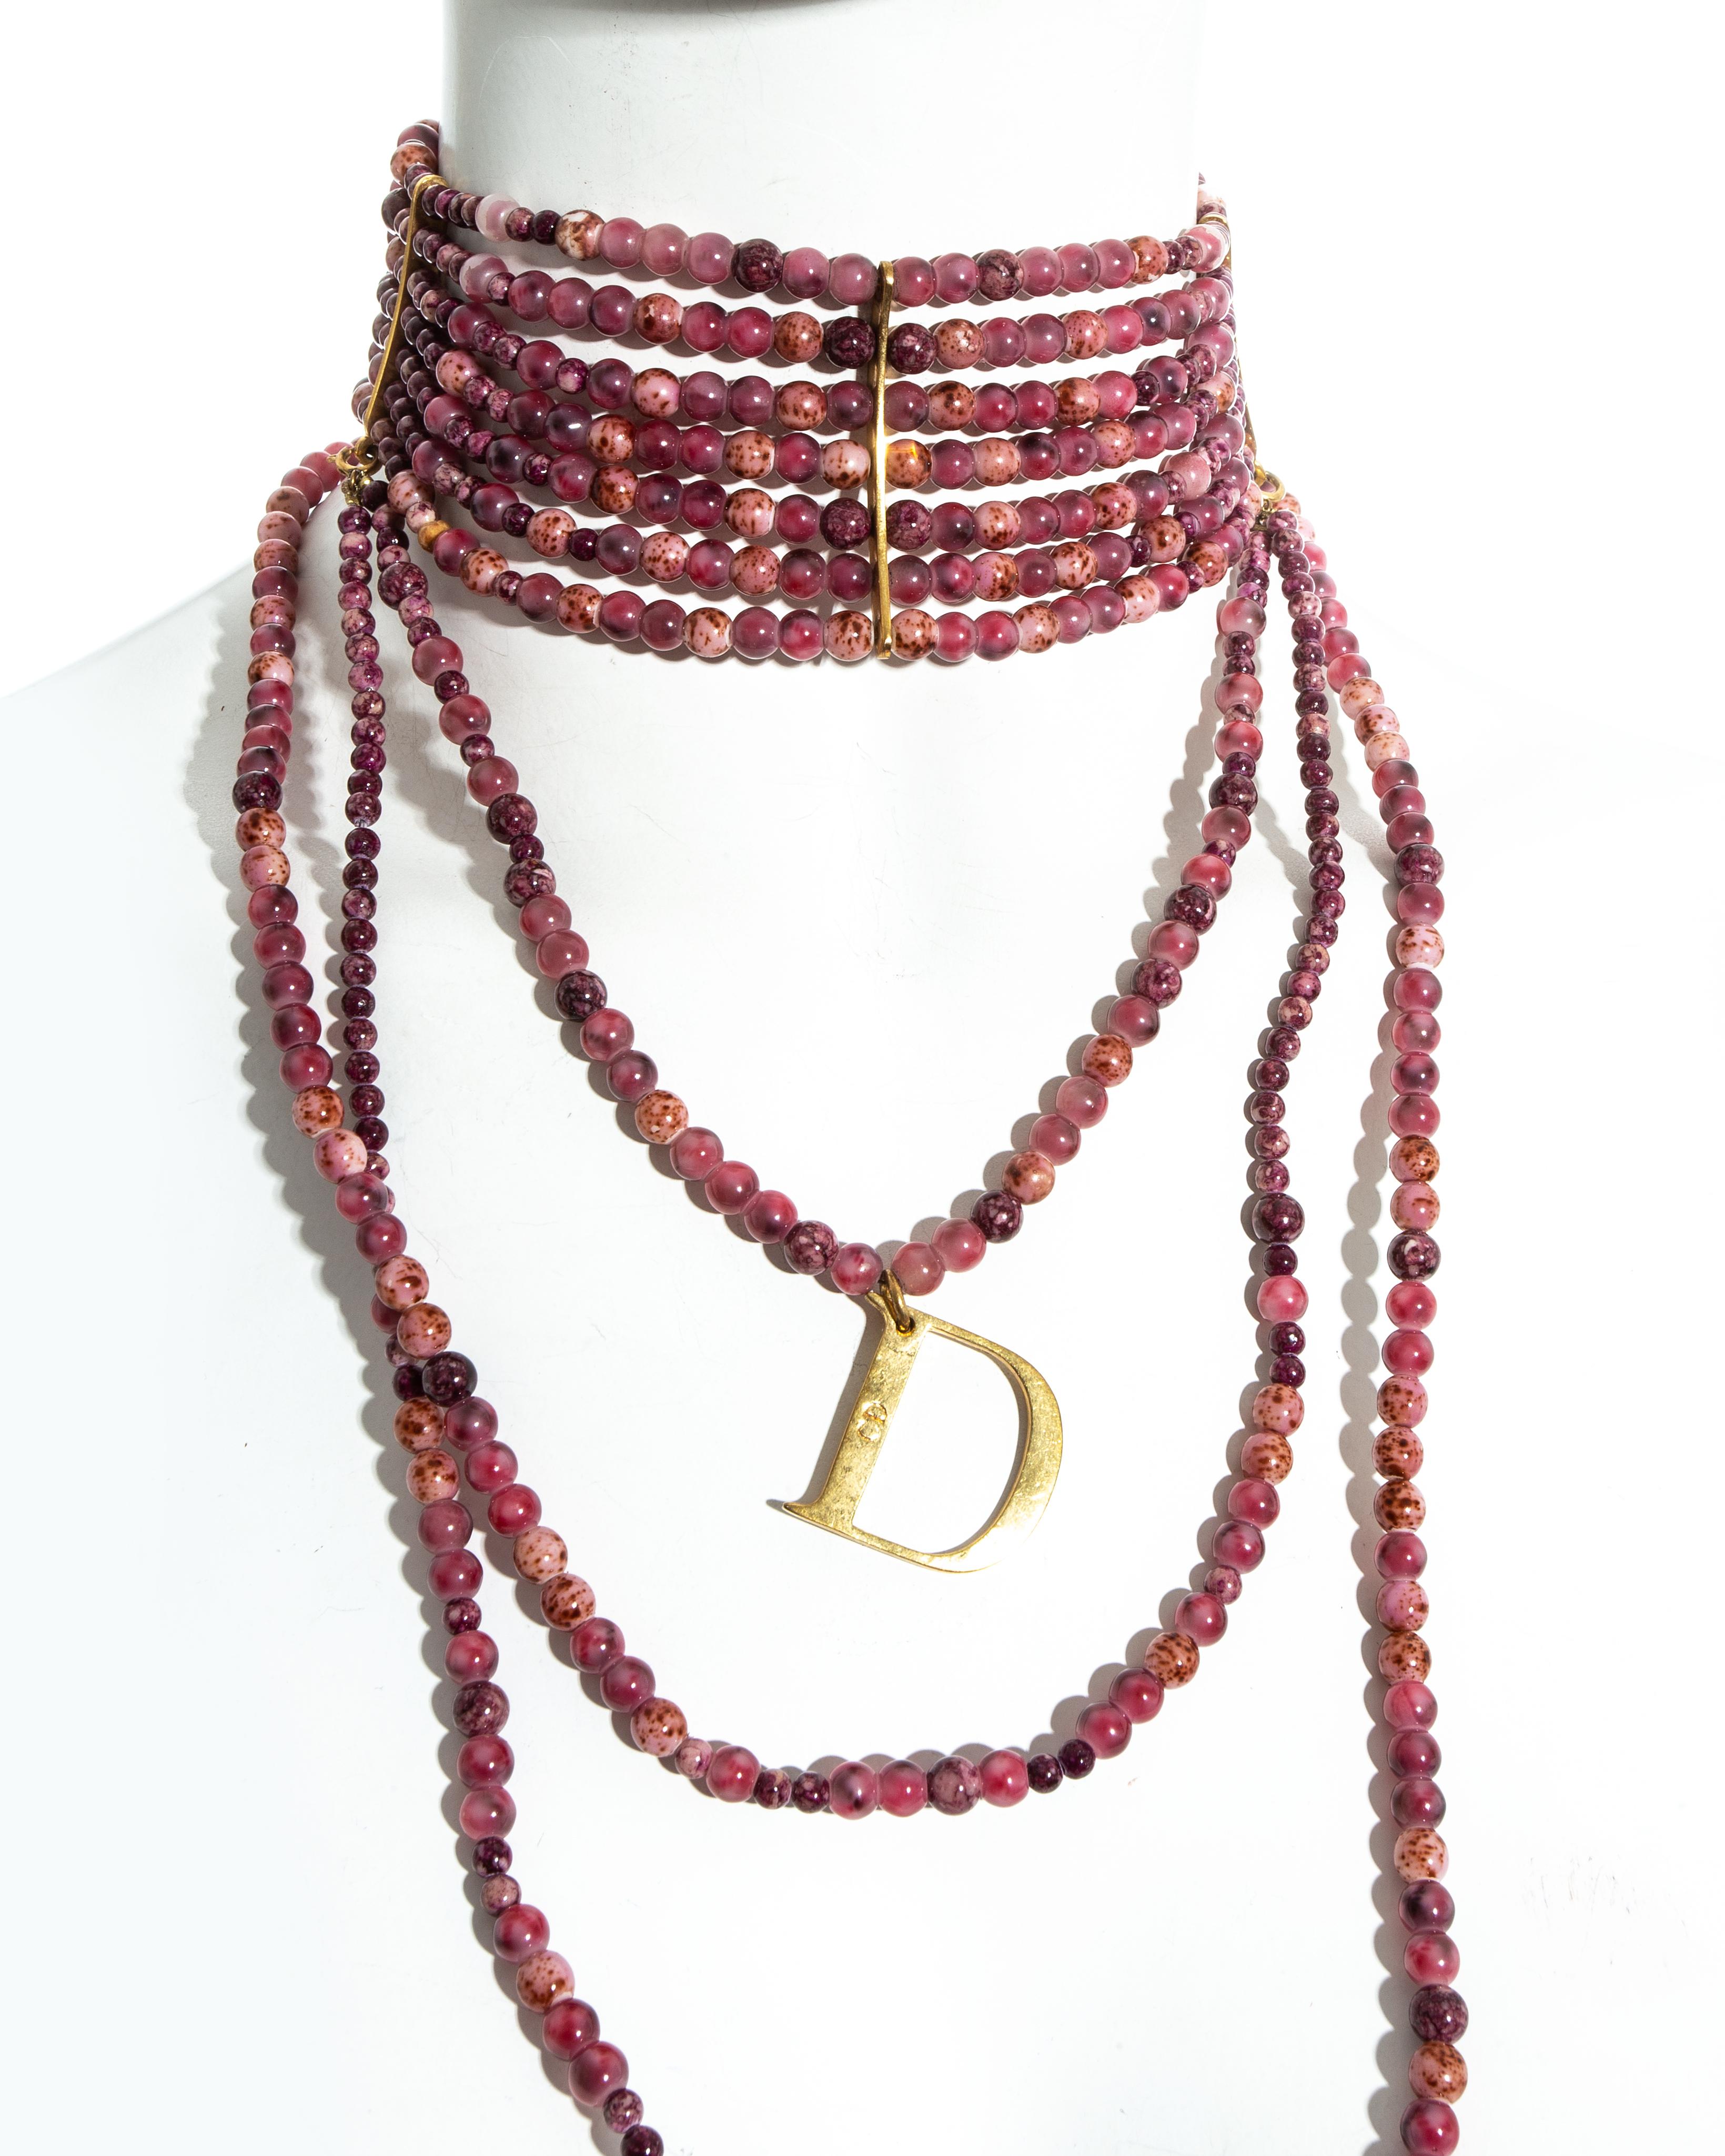 Christian Dior by John Galliano pink marble glass bead choker necklace, fw 1999 3